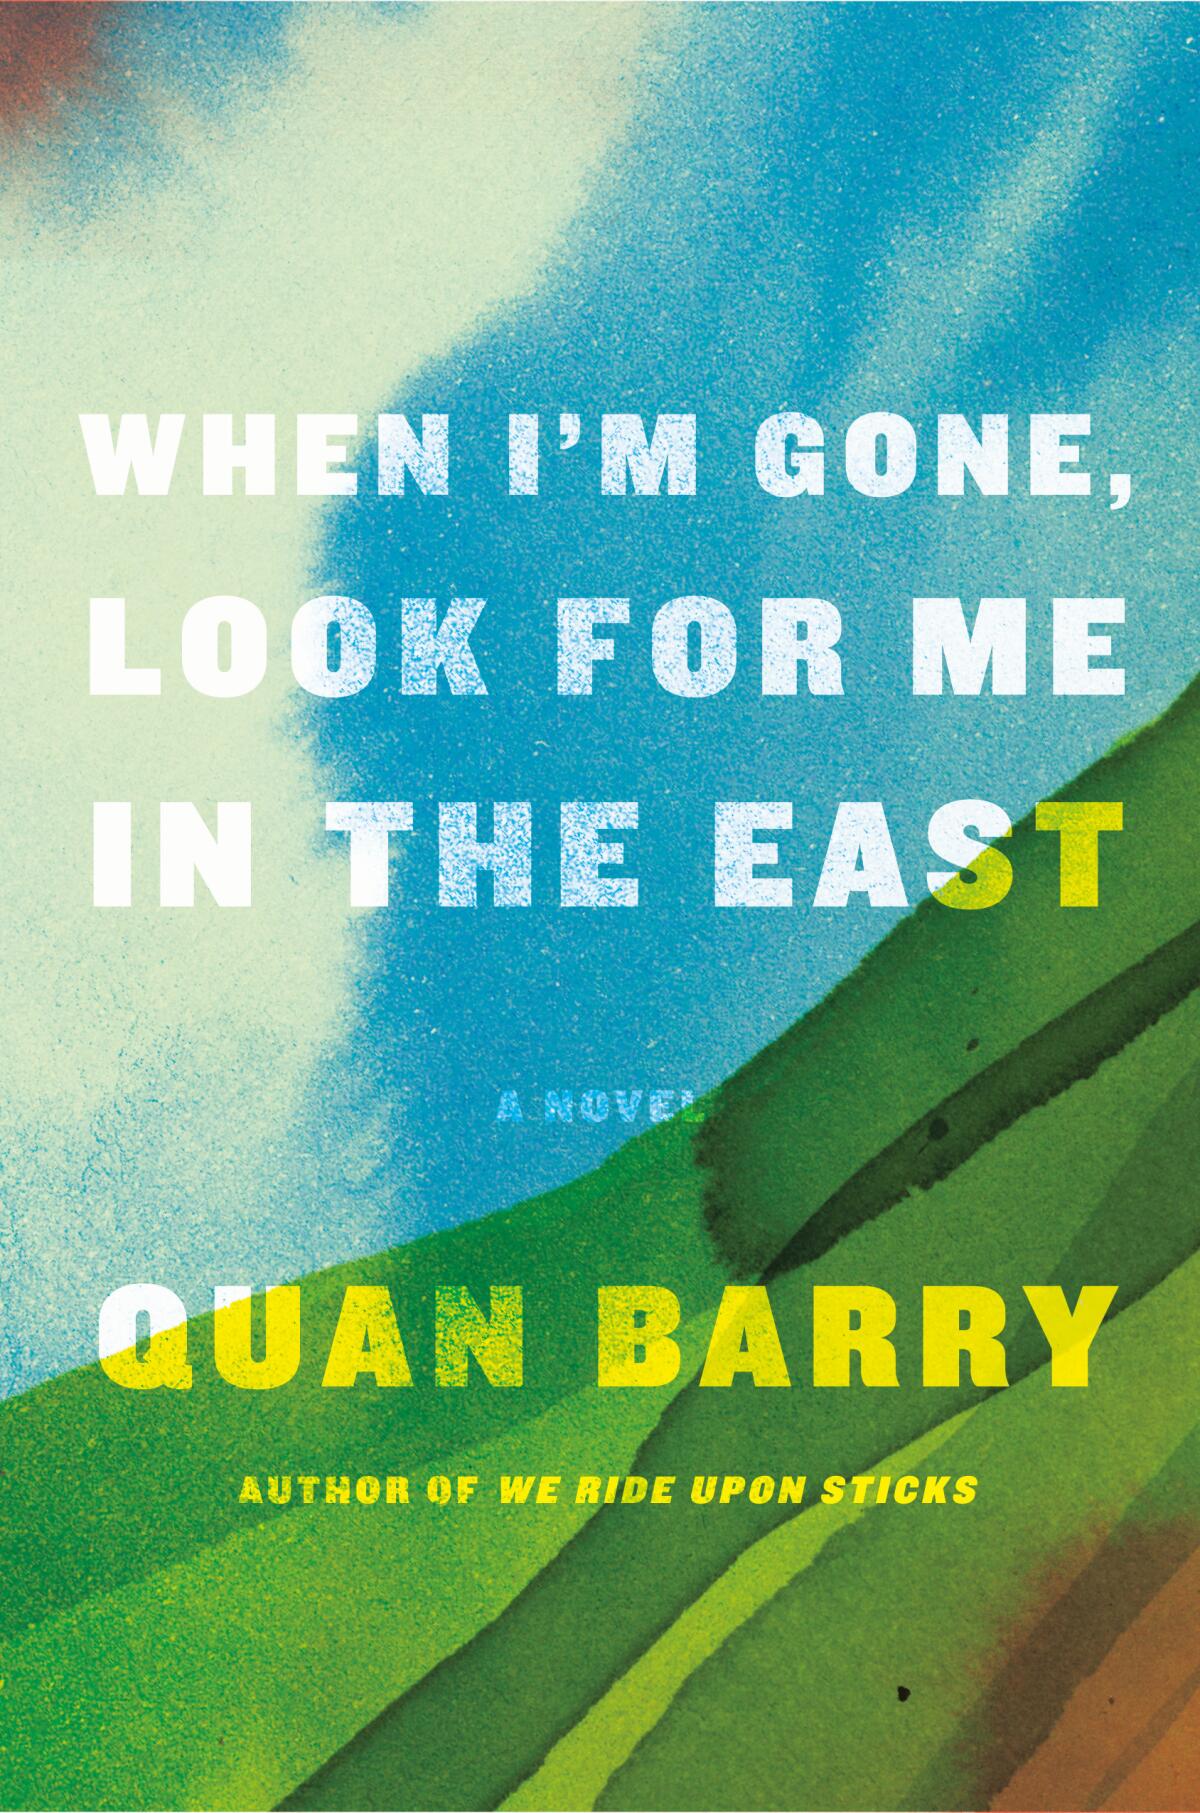 "When I'm Gone, Look For Me in the East," by Quan Barry